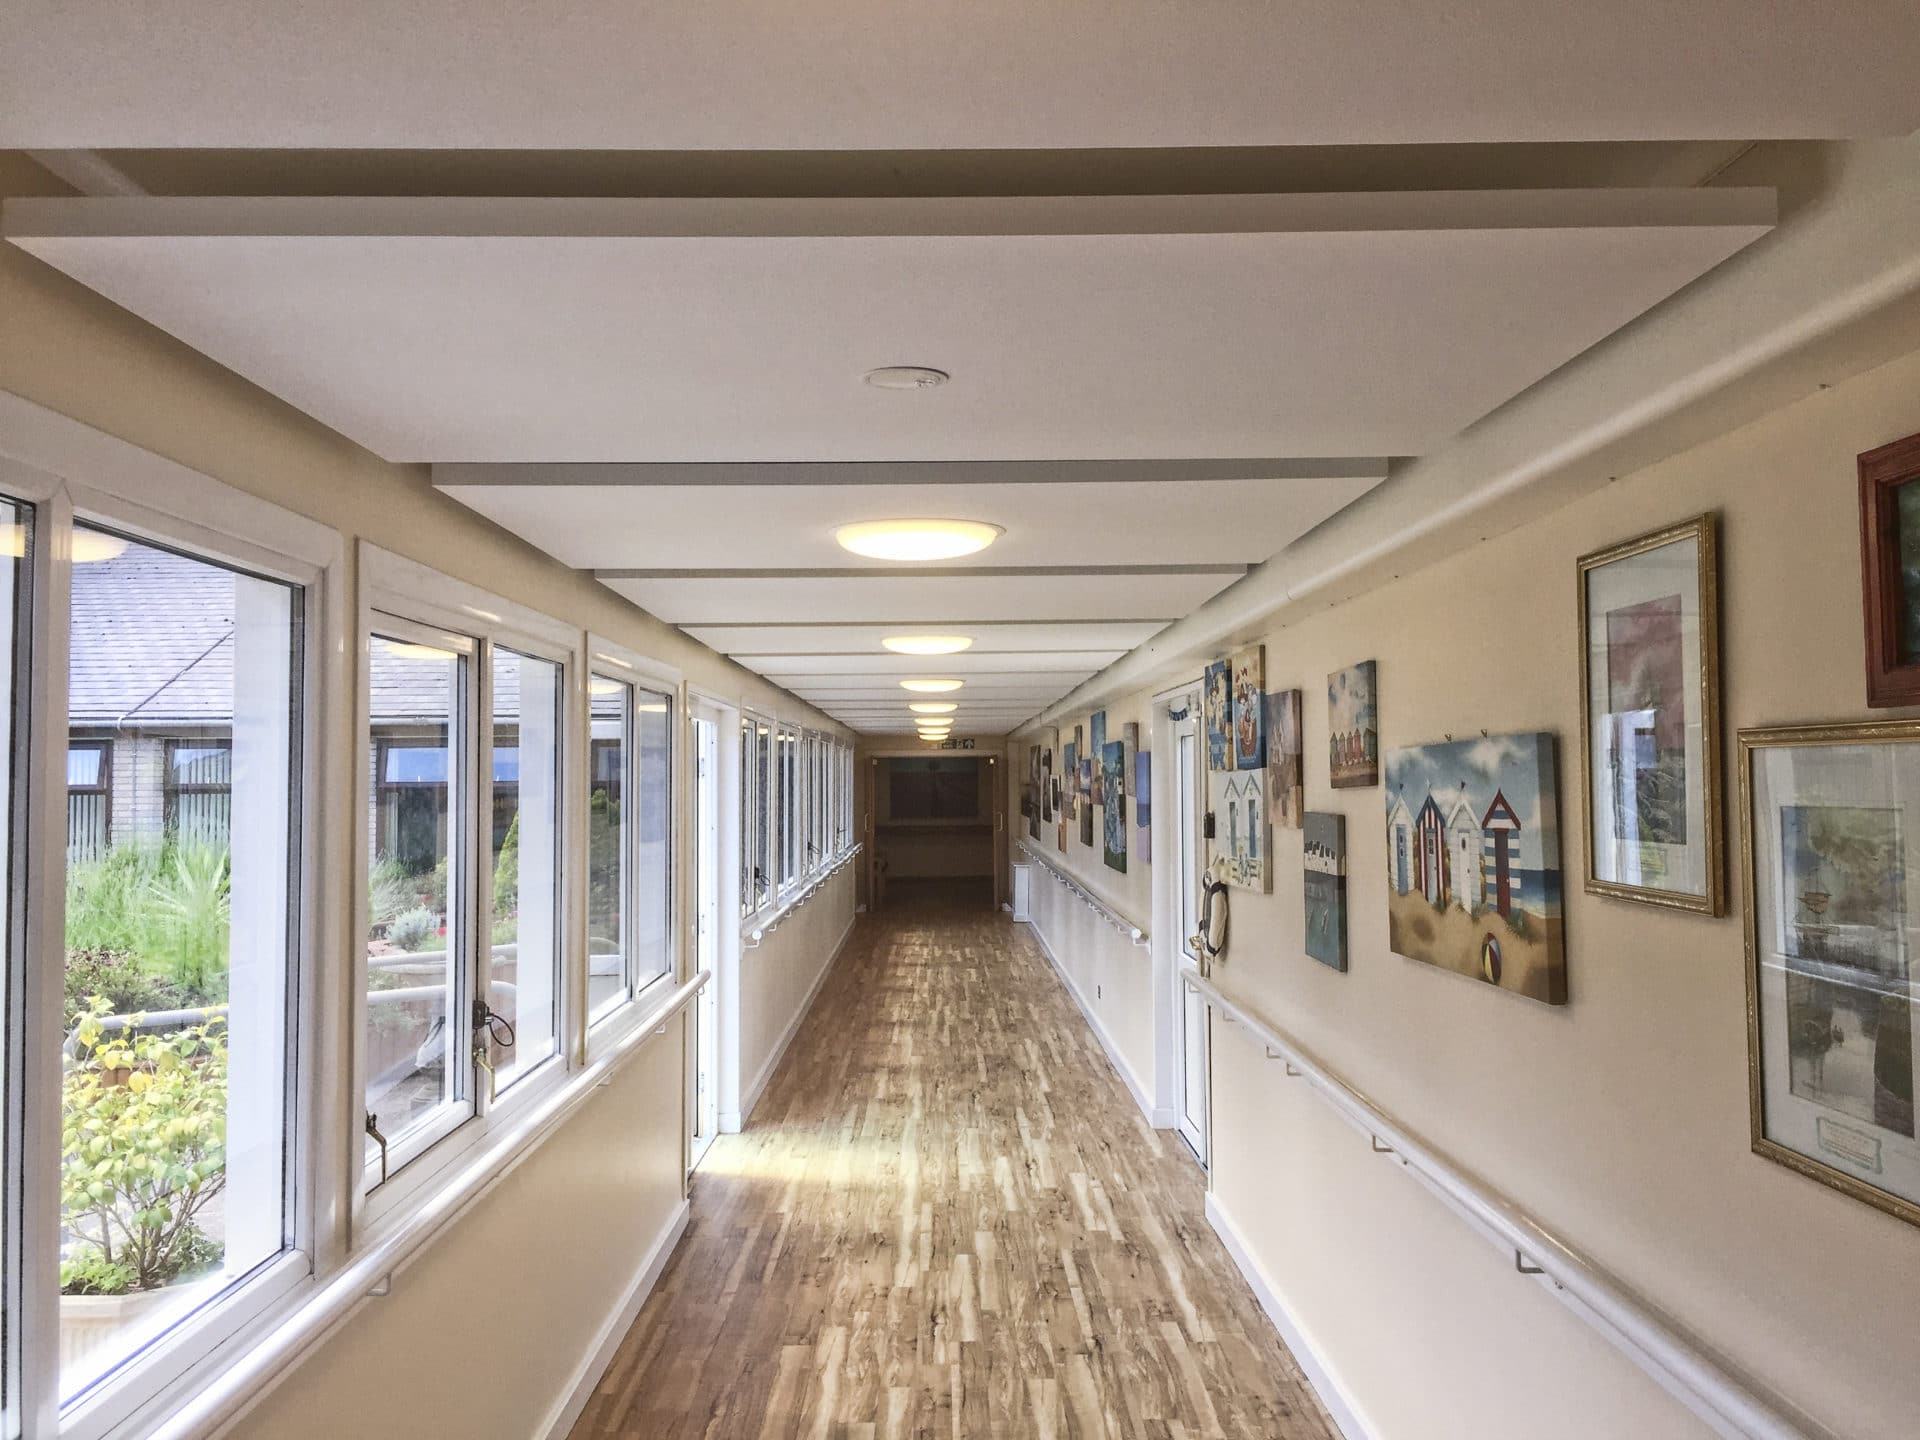 Armstrong ceiling canopies help to update care home